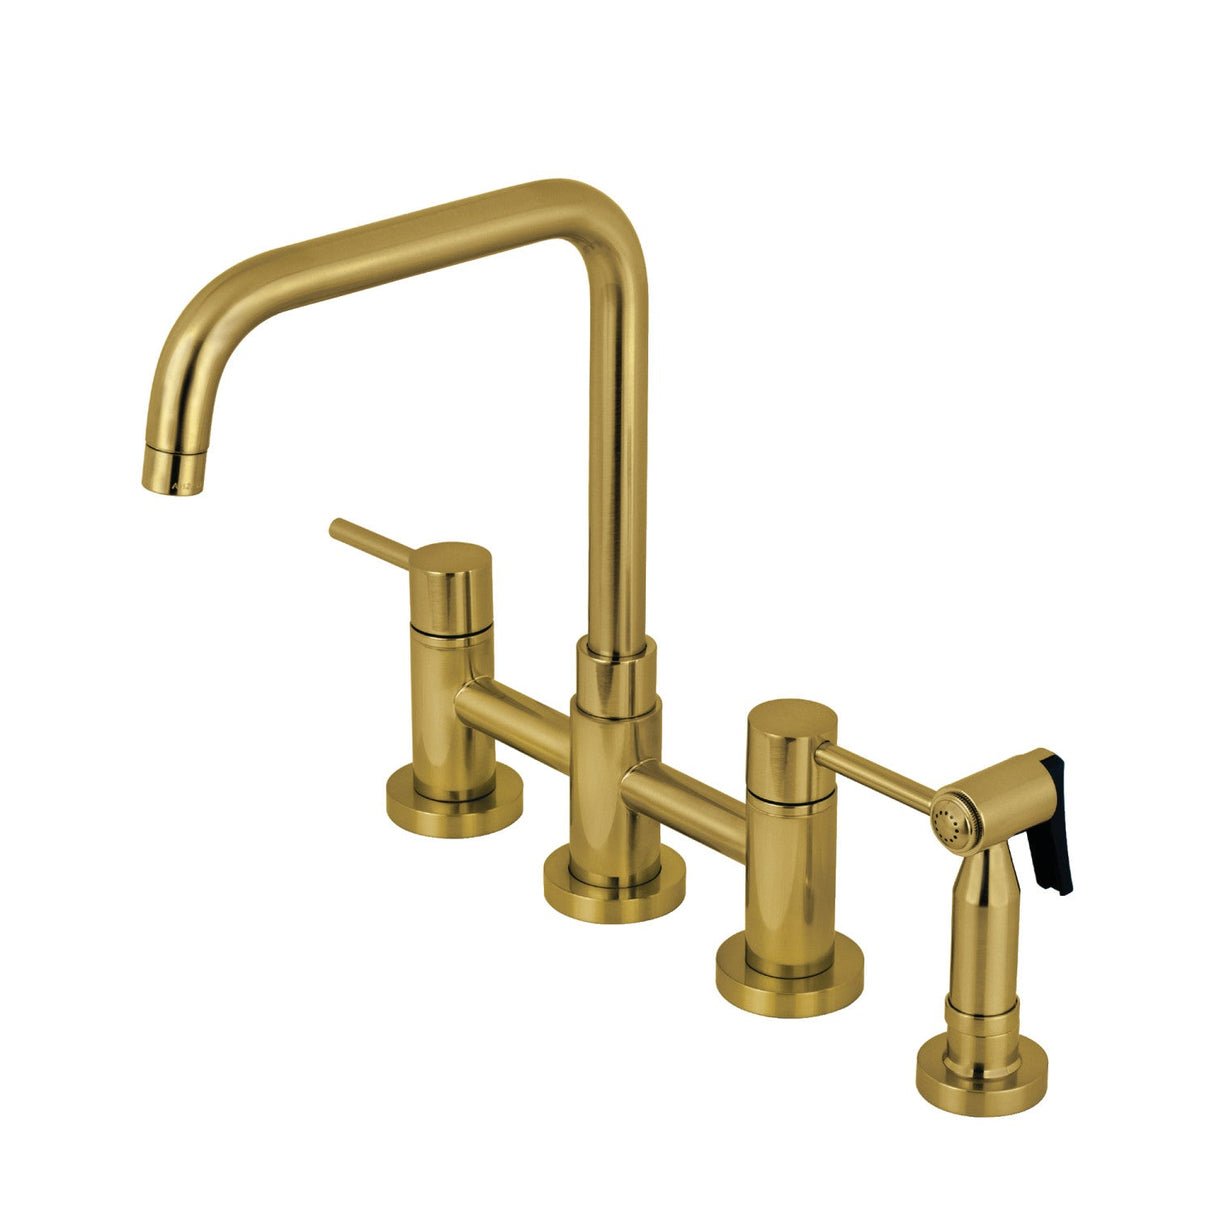 Concord KS8287DLBS Two-Handle 4-Hole Deck Mount Bridge Kitchen Faucet with Brass Sprayer, Brushed Brass